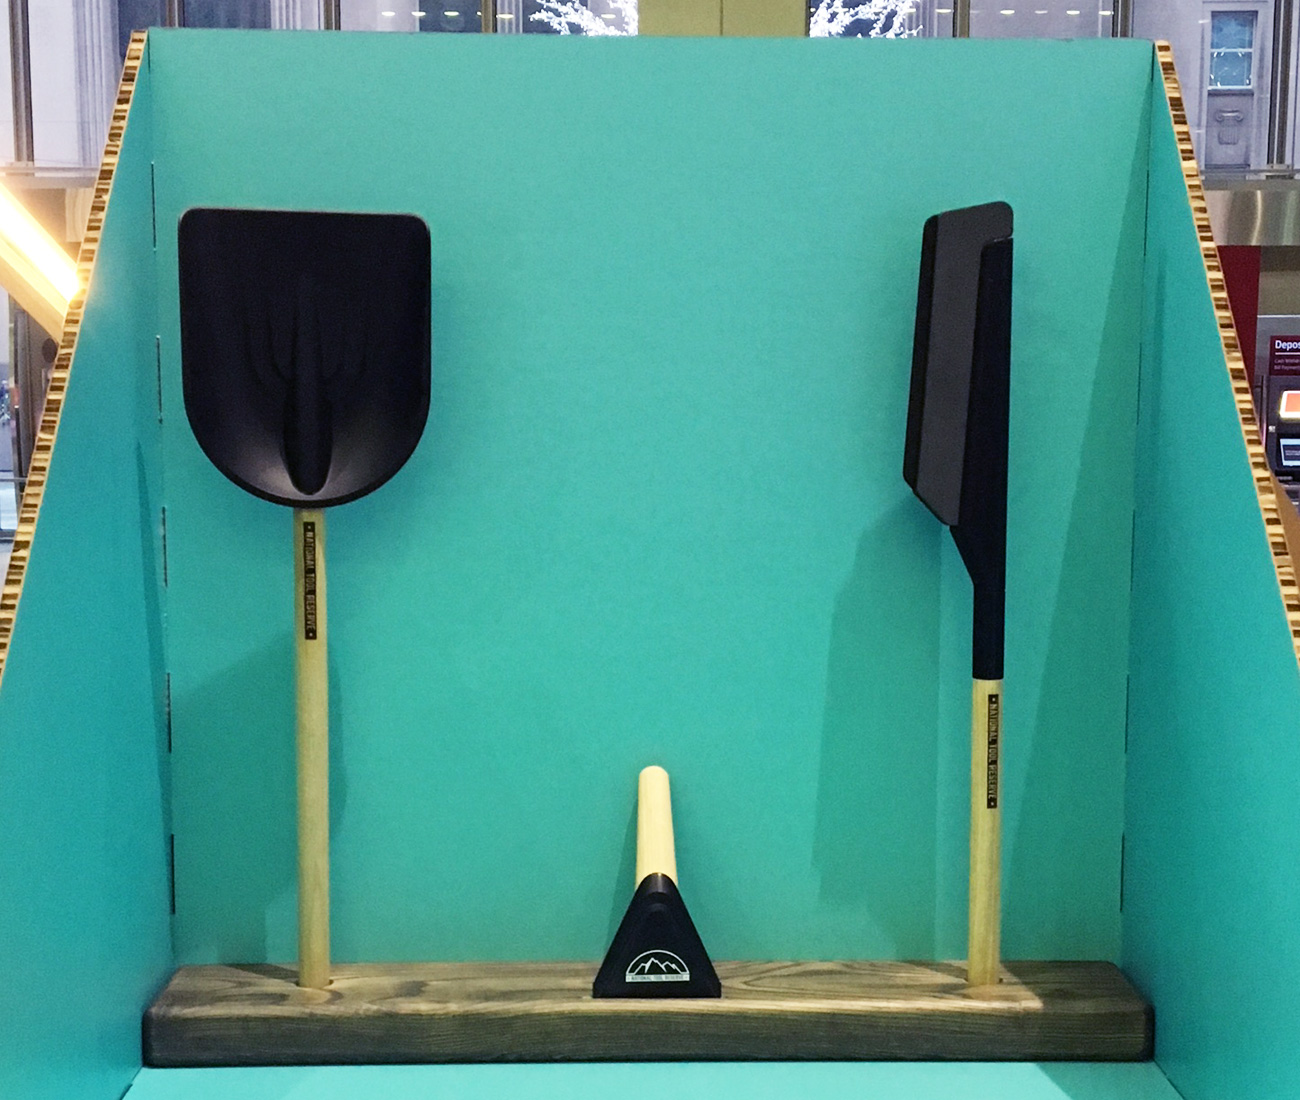 Also found at the IIDEX Woodshop show is this set of snow tools by Adam Shepperdly of Shepp Industrial Design Inc. We love the stowable size, easy grip and ideal weight of the ice scraper, mini shovel and snow brush and that these attractive (!) tools are made locally from fallen ash. (Commerce Court, West Tower Lobby, 199 Bay St.)